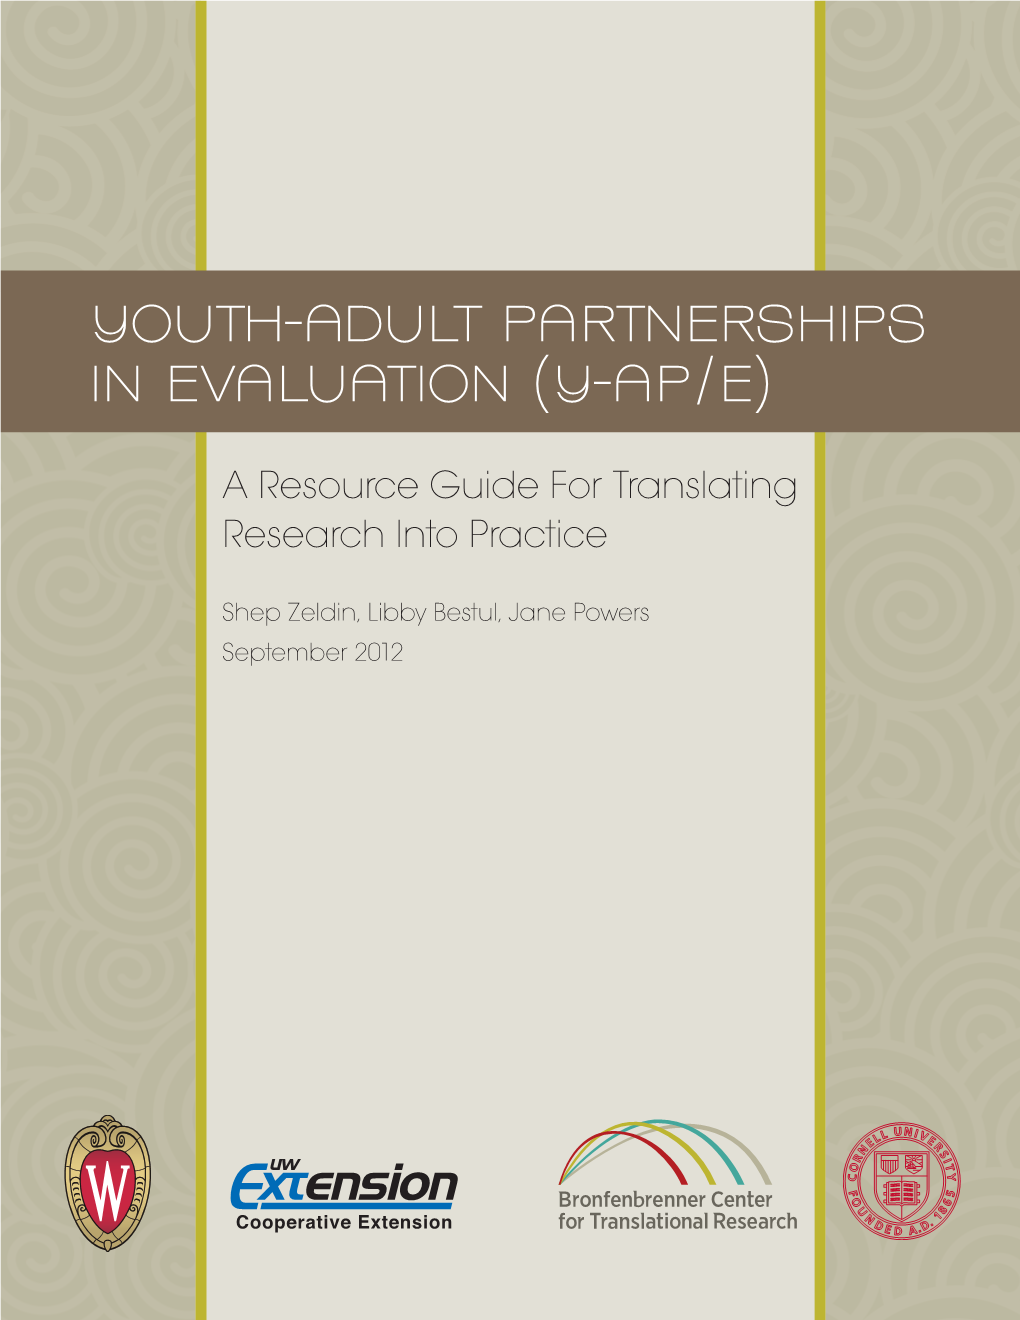 Youth-Adult Partnerships in Evaluation (Y-Ap/E)